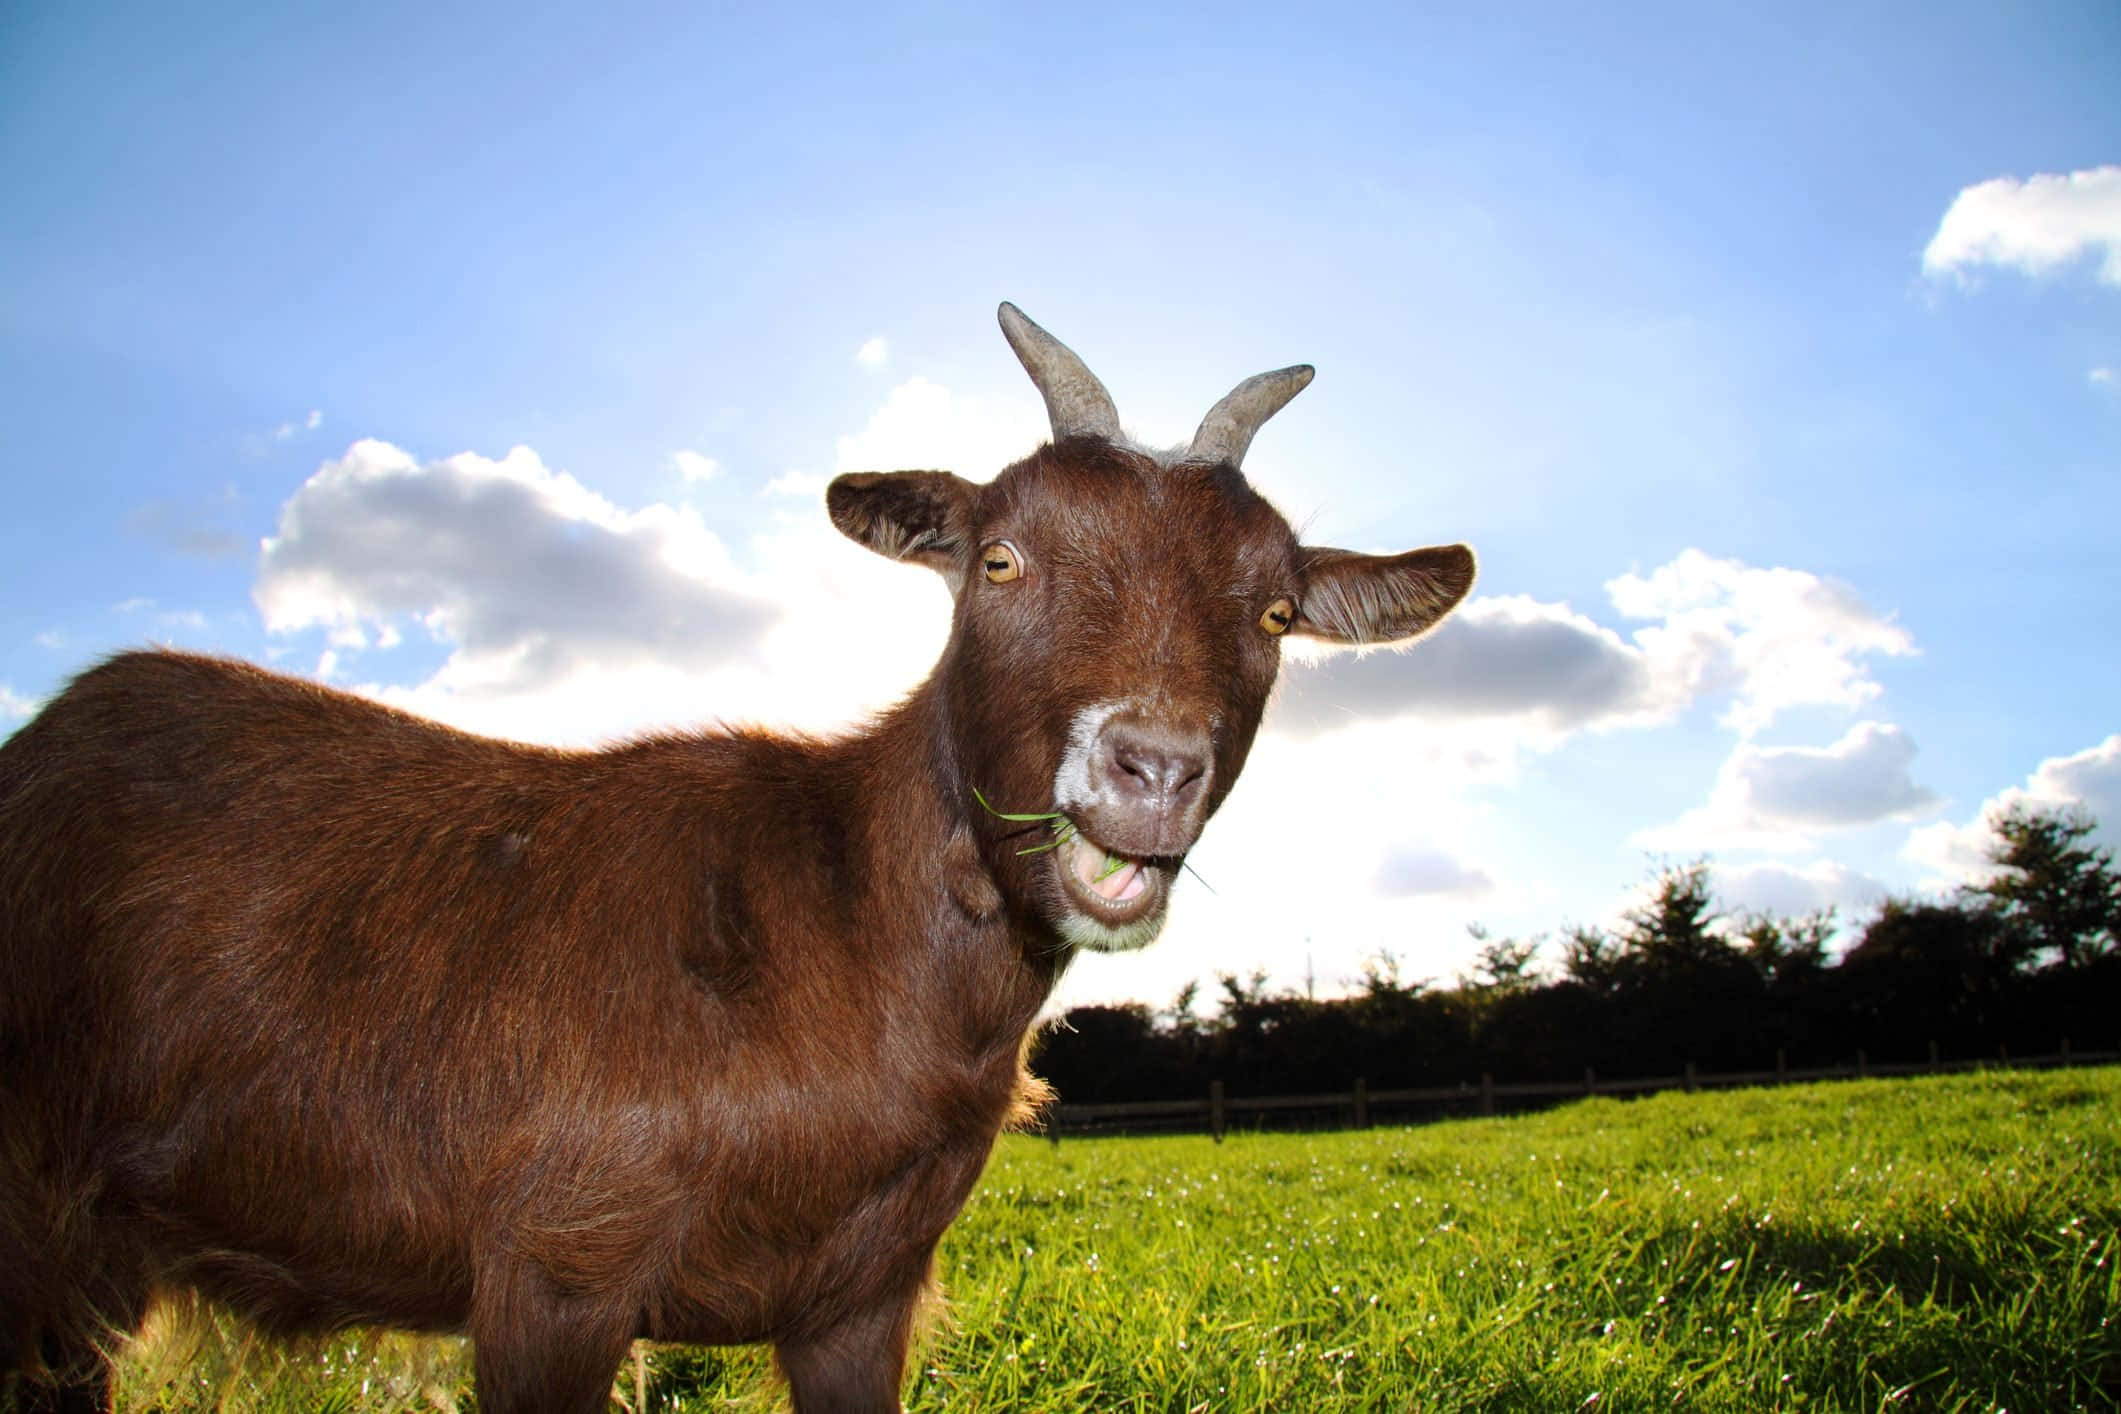 Cheeky Smile Of The Countryside: An Amusing Goat Portrait